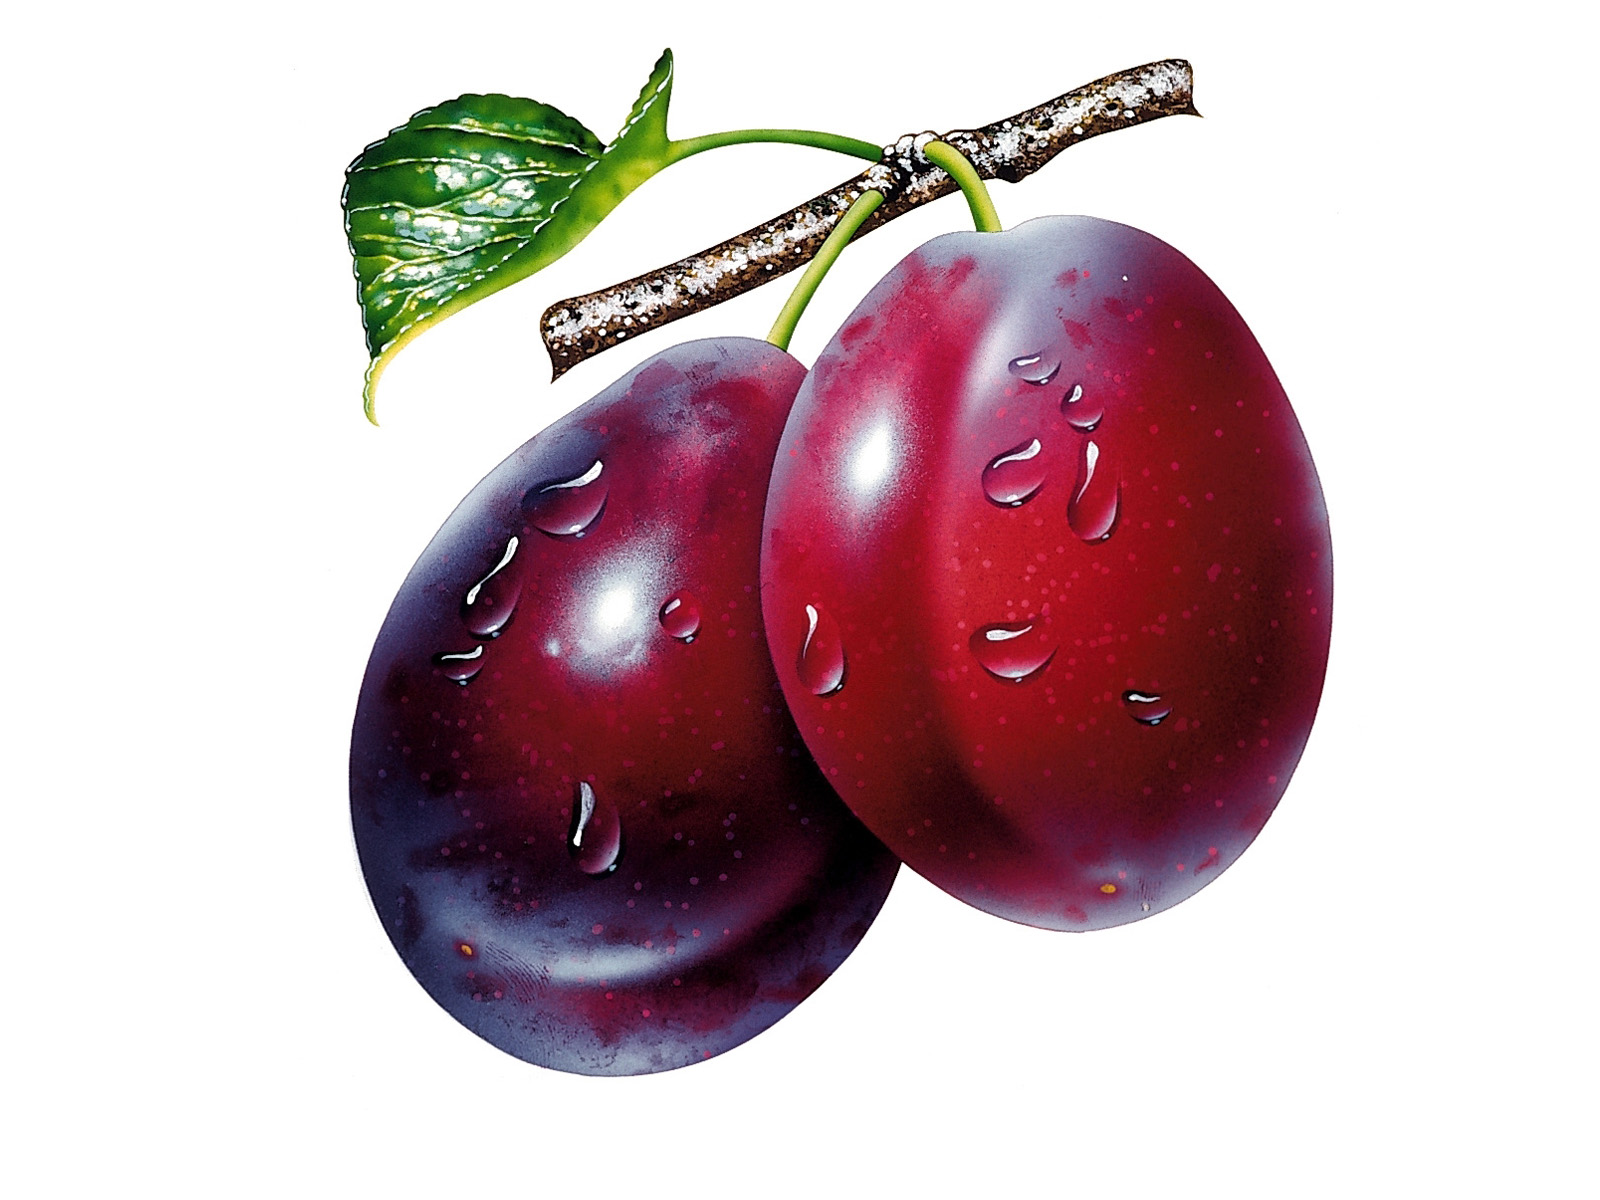 Plums | Tips for Your Health